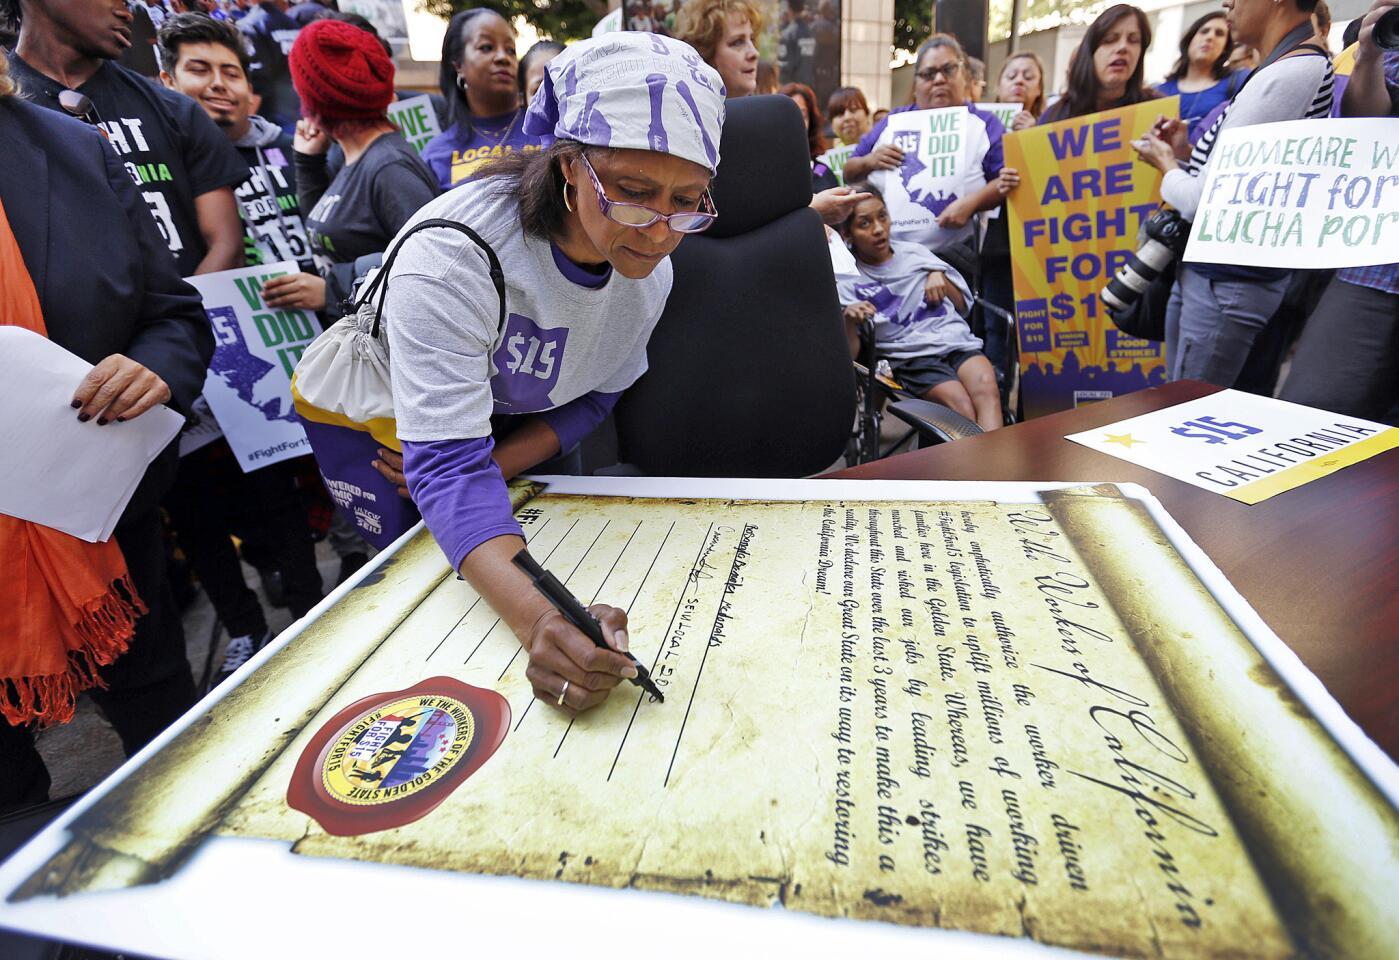 Cassandra Sanchez, a member of the union that represents long-term healthcare workers, signs a symbolic bill during a rally celebrating California's minimum wage hike.